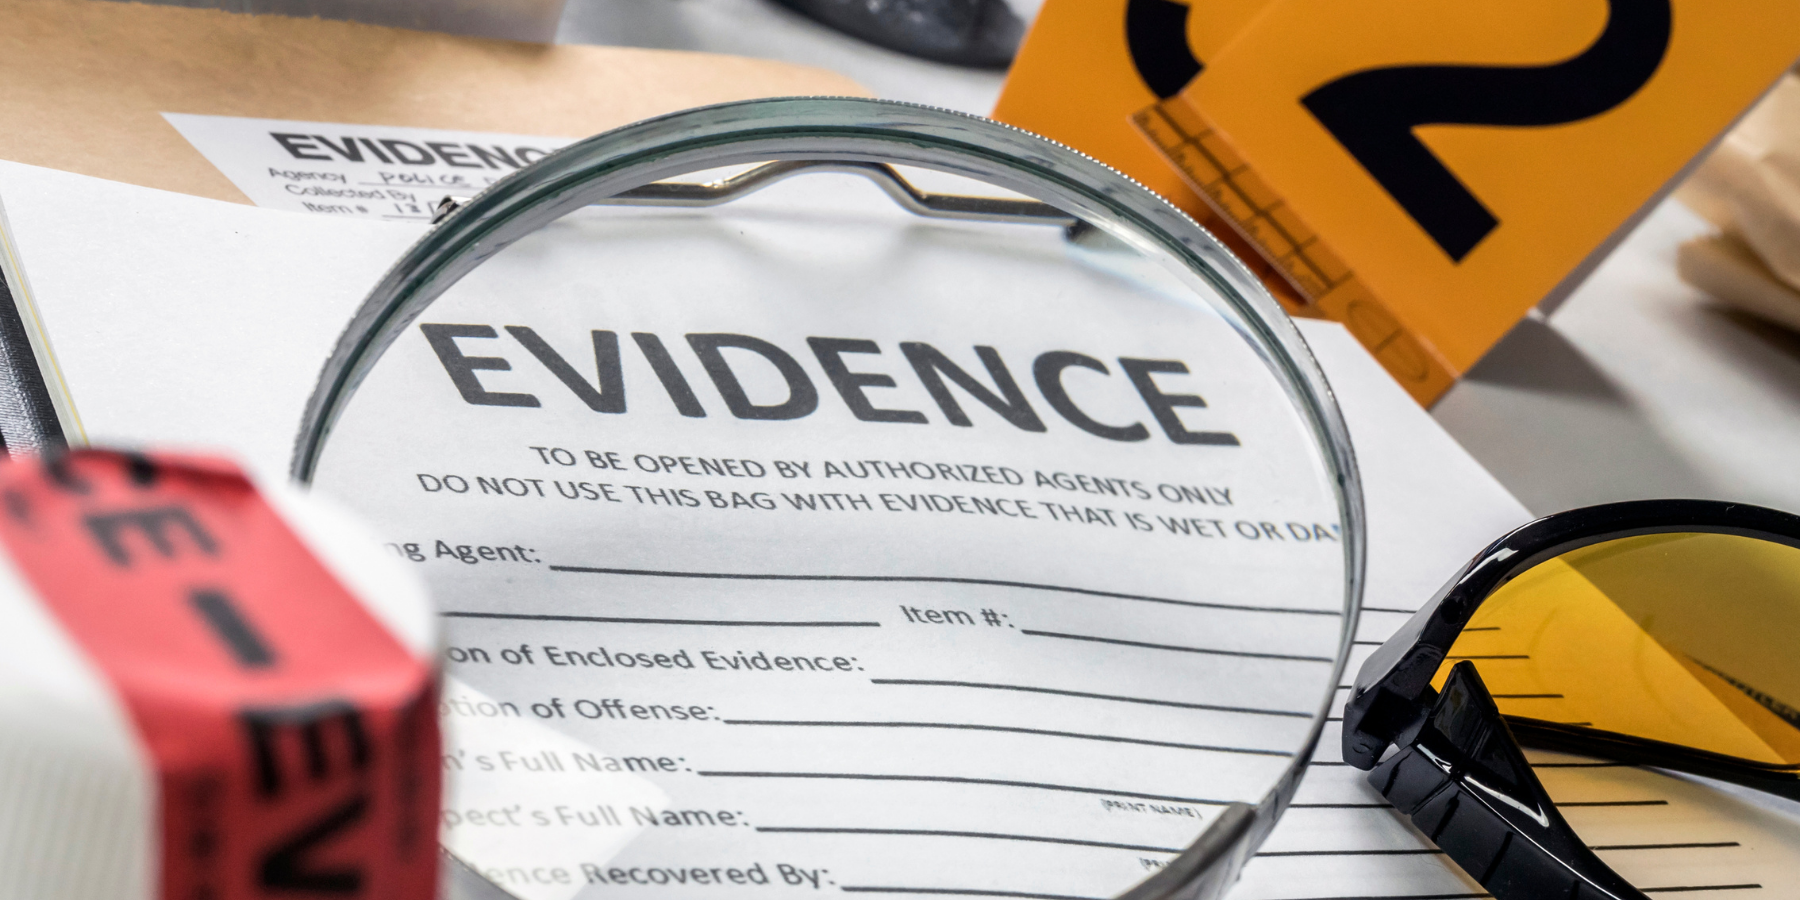 Tips on gathering Physical Evidence